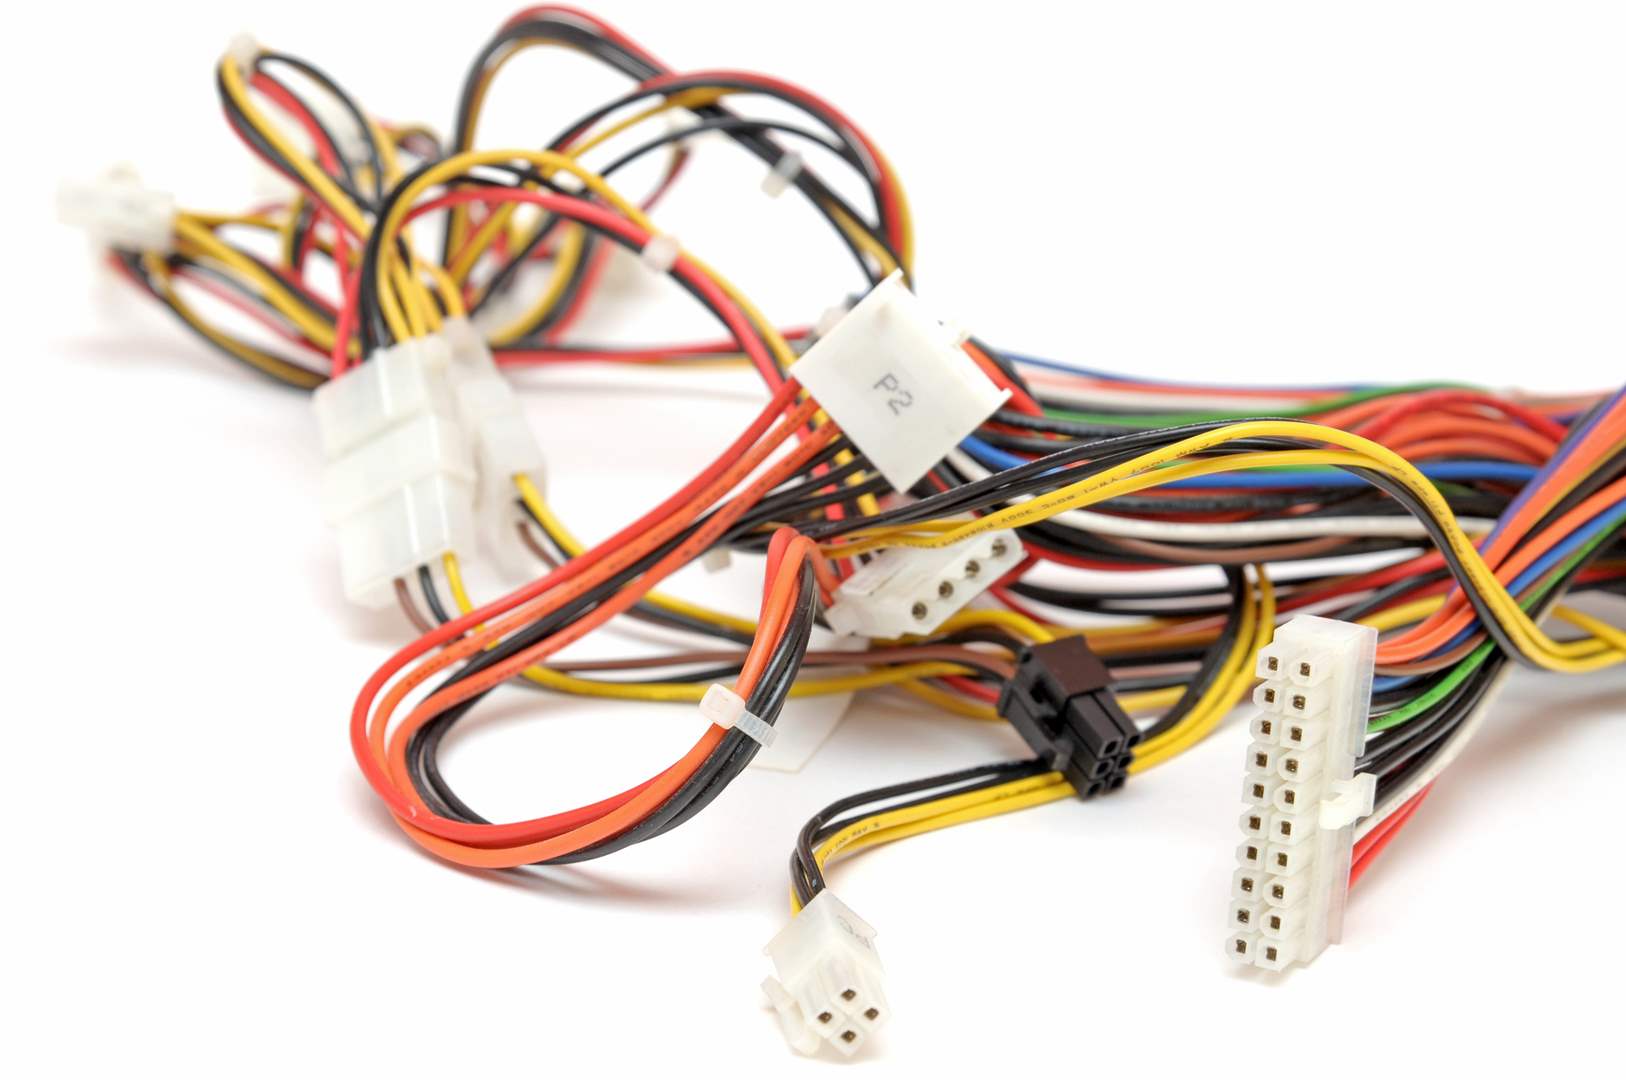 multicolor wires and cable connectors